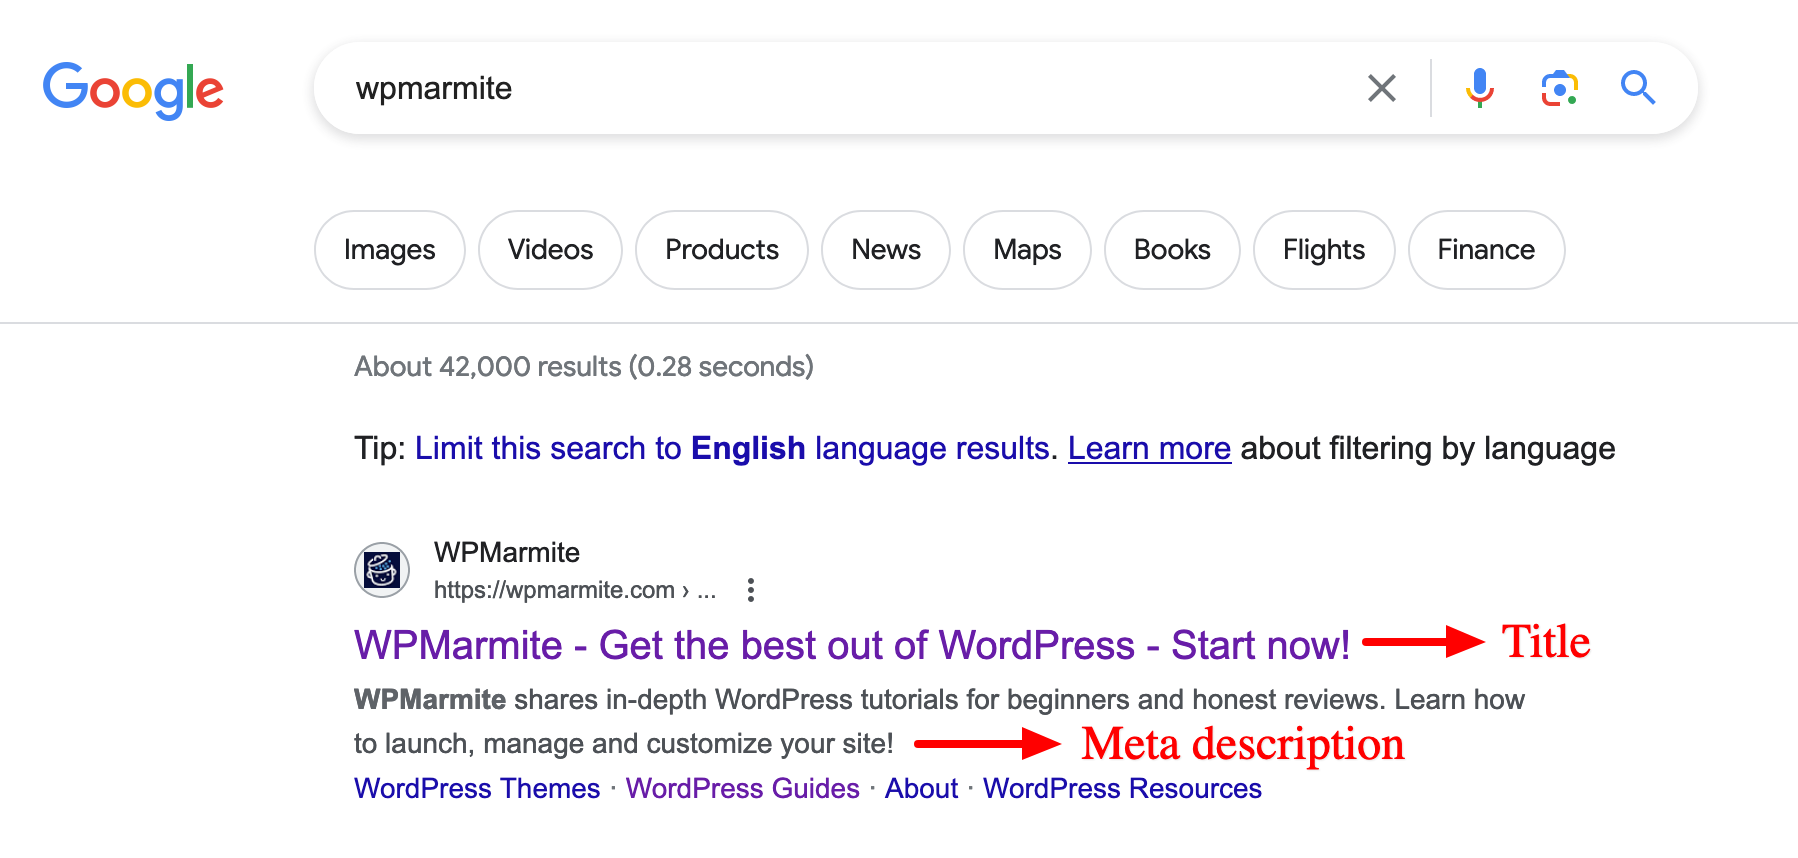 WPMarmite in the search results of Google with the title and the meta description from Yoast SEO.